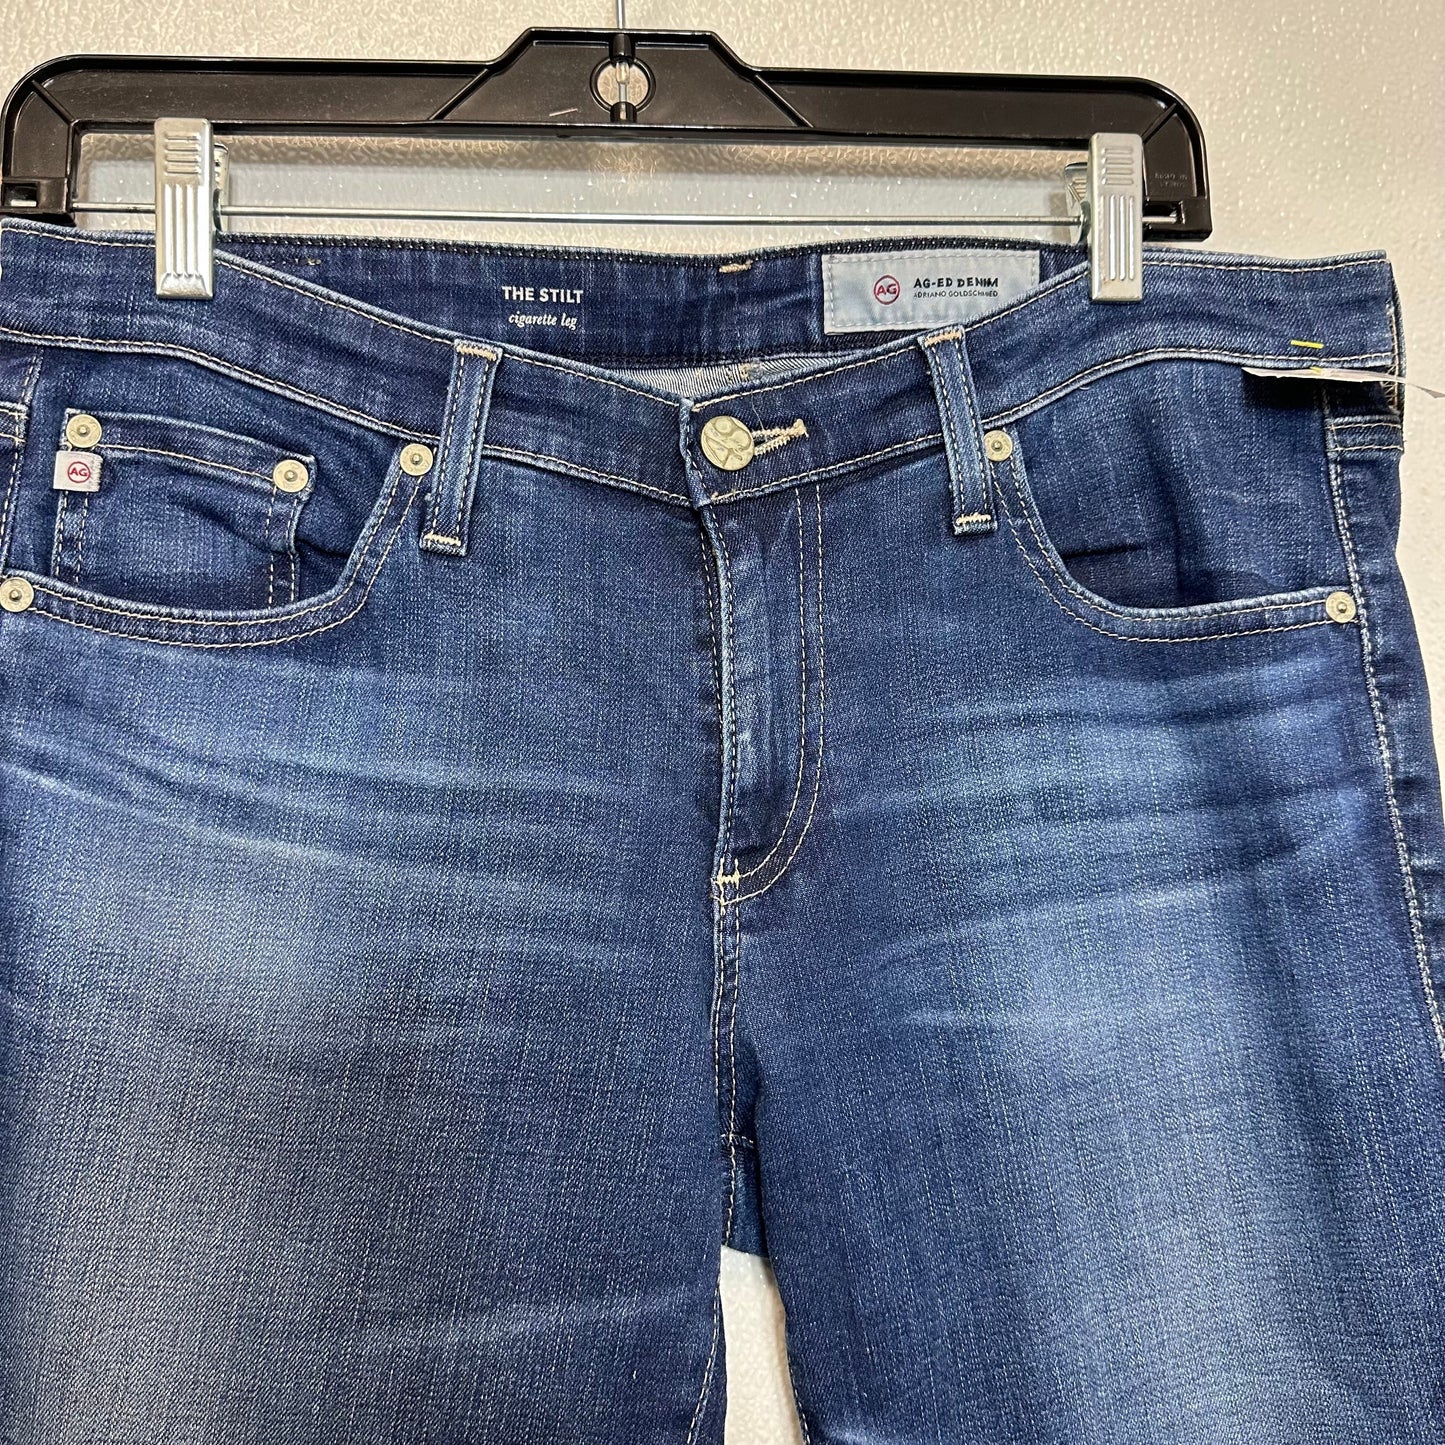 Jeans Straight By Adriano Goldschmied  Size: 10